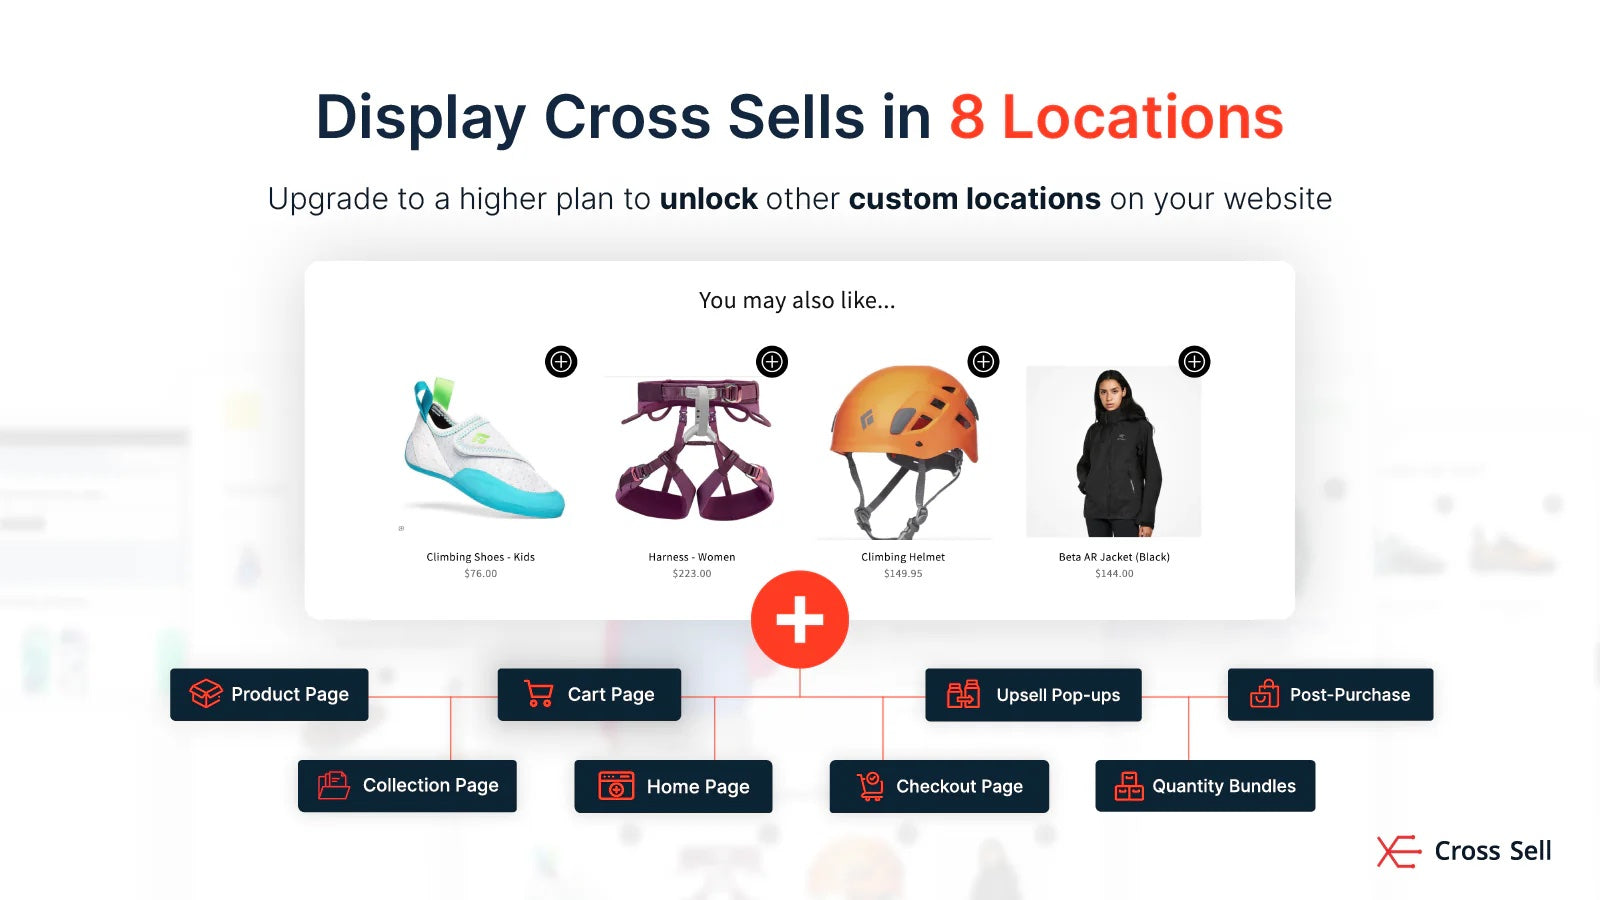 Cross Sell & Upsell features